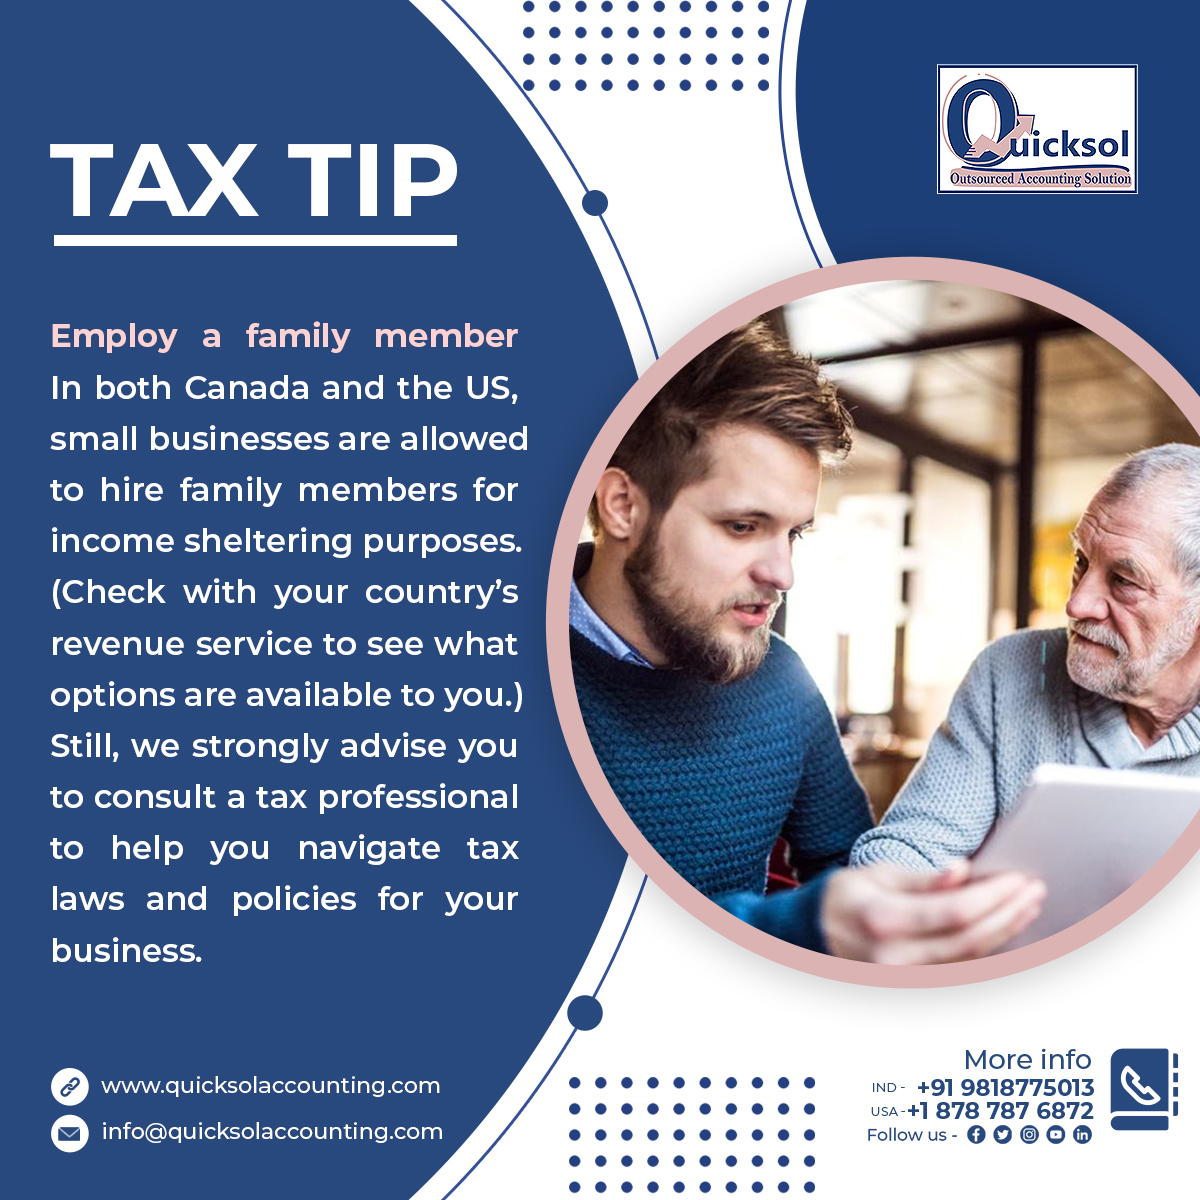 TAX TIP - Employ a family member

 #bookkeeper #onlinebookkeeping #lgbtowned #minorityowned #bookkeeping #accountant #accounting #smallbusiness #bookkeepingservices #entrepreneurship #taxseason #business #smallbusinessowner #taxes #finance #payroll #tax #accountingservices